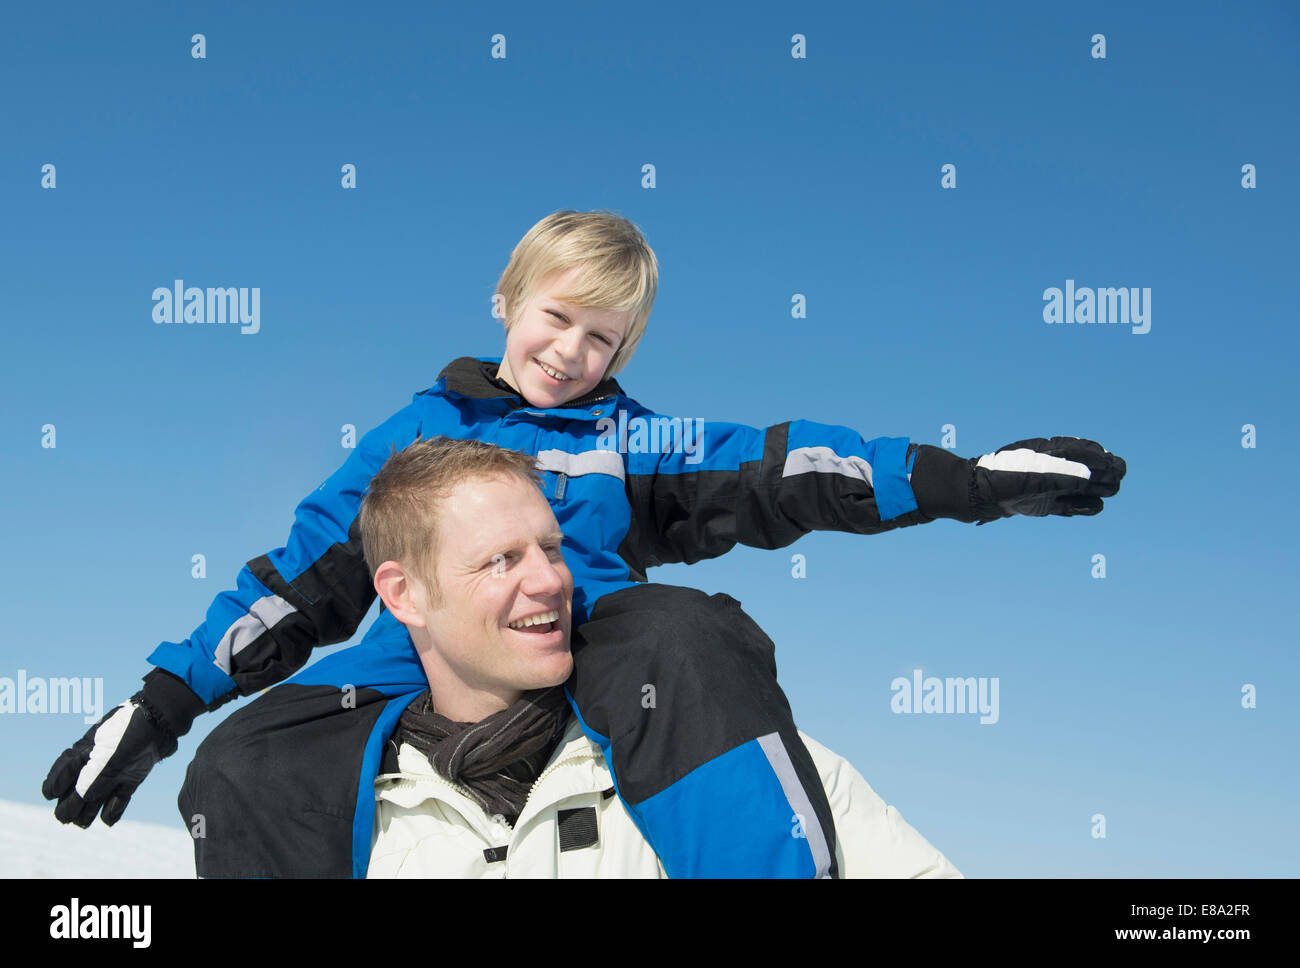 Father carrying son on shoulder, smiling, Bavaria, Germany Stock Photo